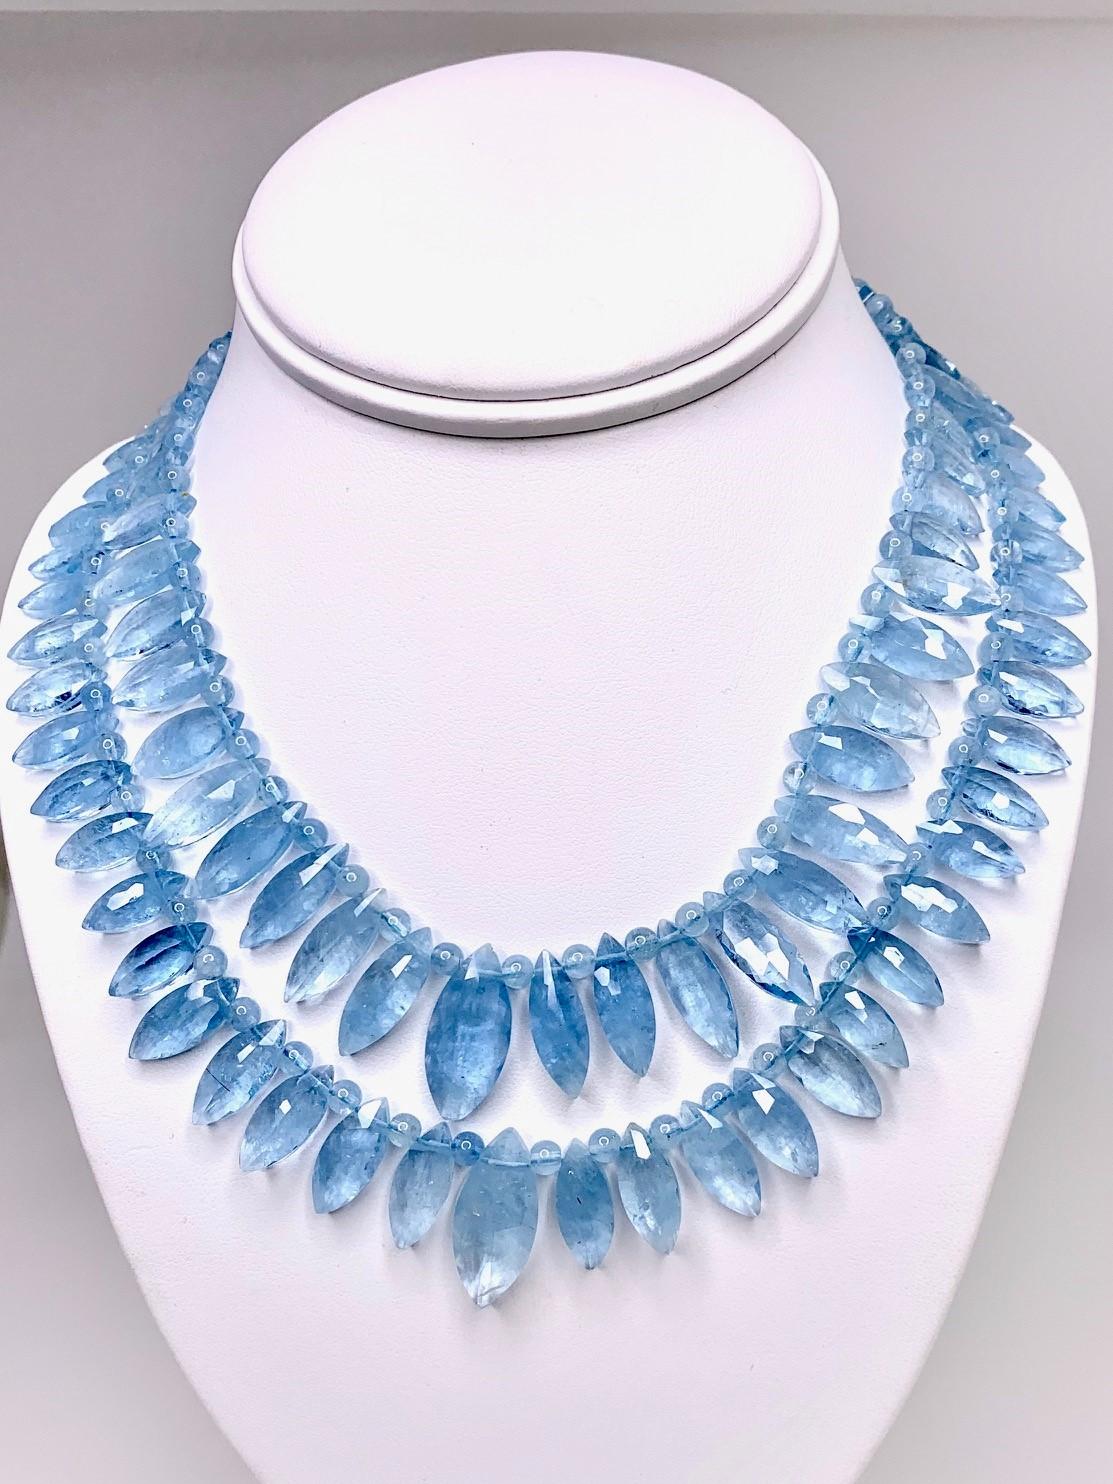 This striking necklace features two strands of beautiful Brazilian aquamarine beads in graduating marquise shapes, separated by round aquamarine beads. The beads are a mesmerizing shade of aqua blue and the 2-inch extender offers wonderful